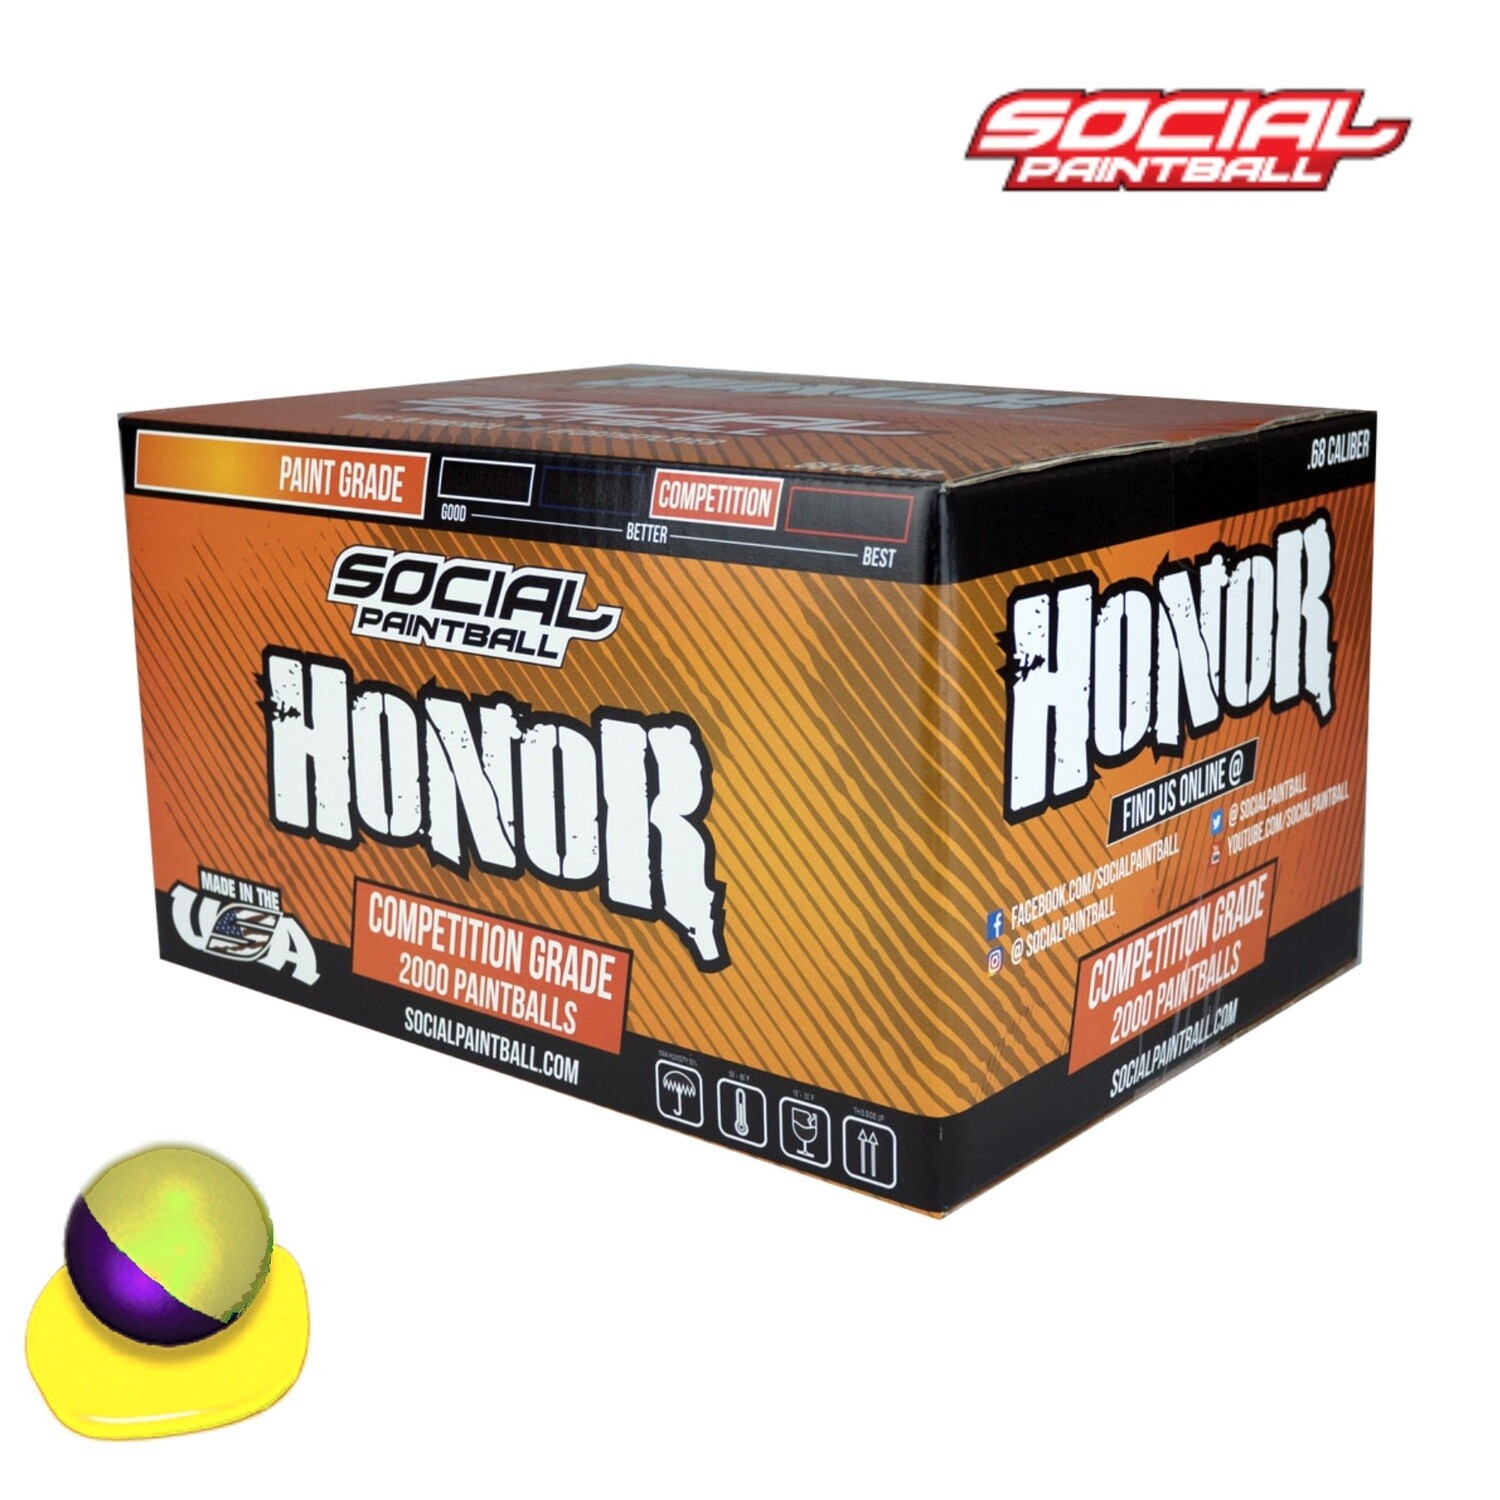 Social Paintball Honor .68 cal Paintballs - Case of 2000 Rds - Purple/Yellow Shell - Yellow Fill